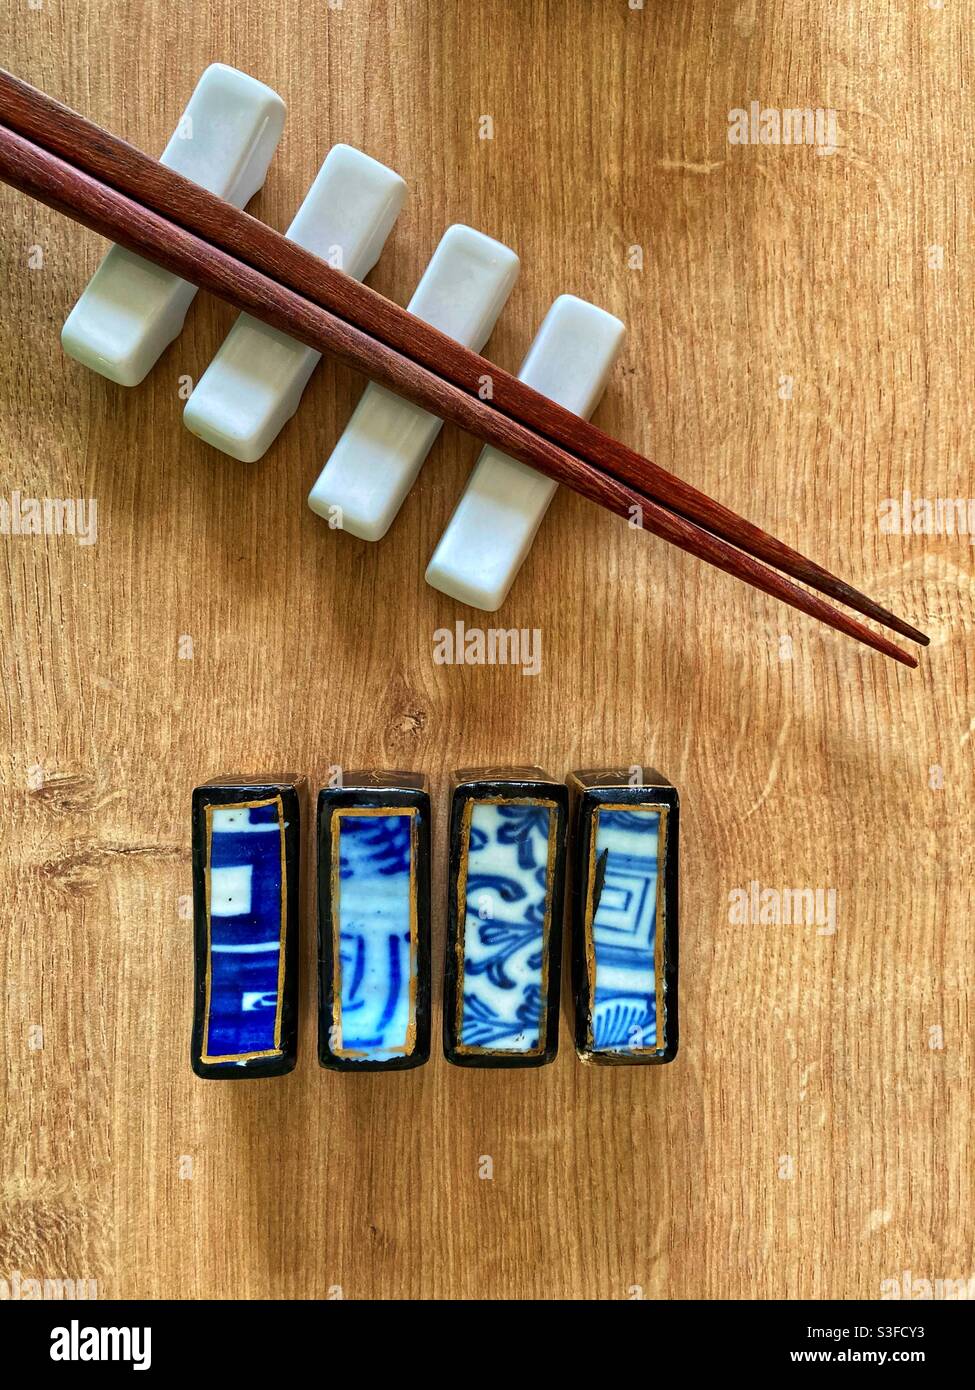 Chopsticks pictured with chopstick rests Stock Photo